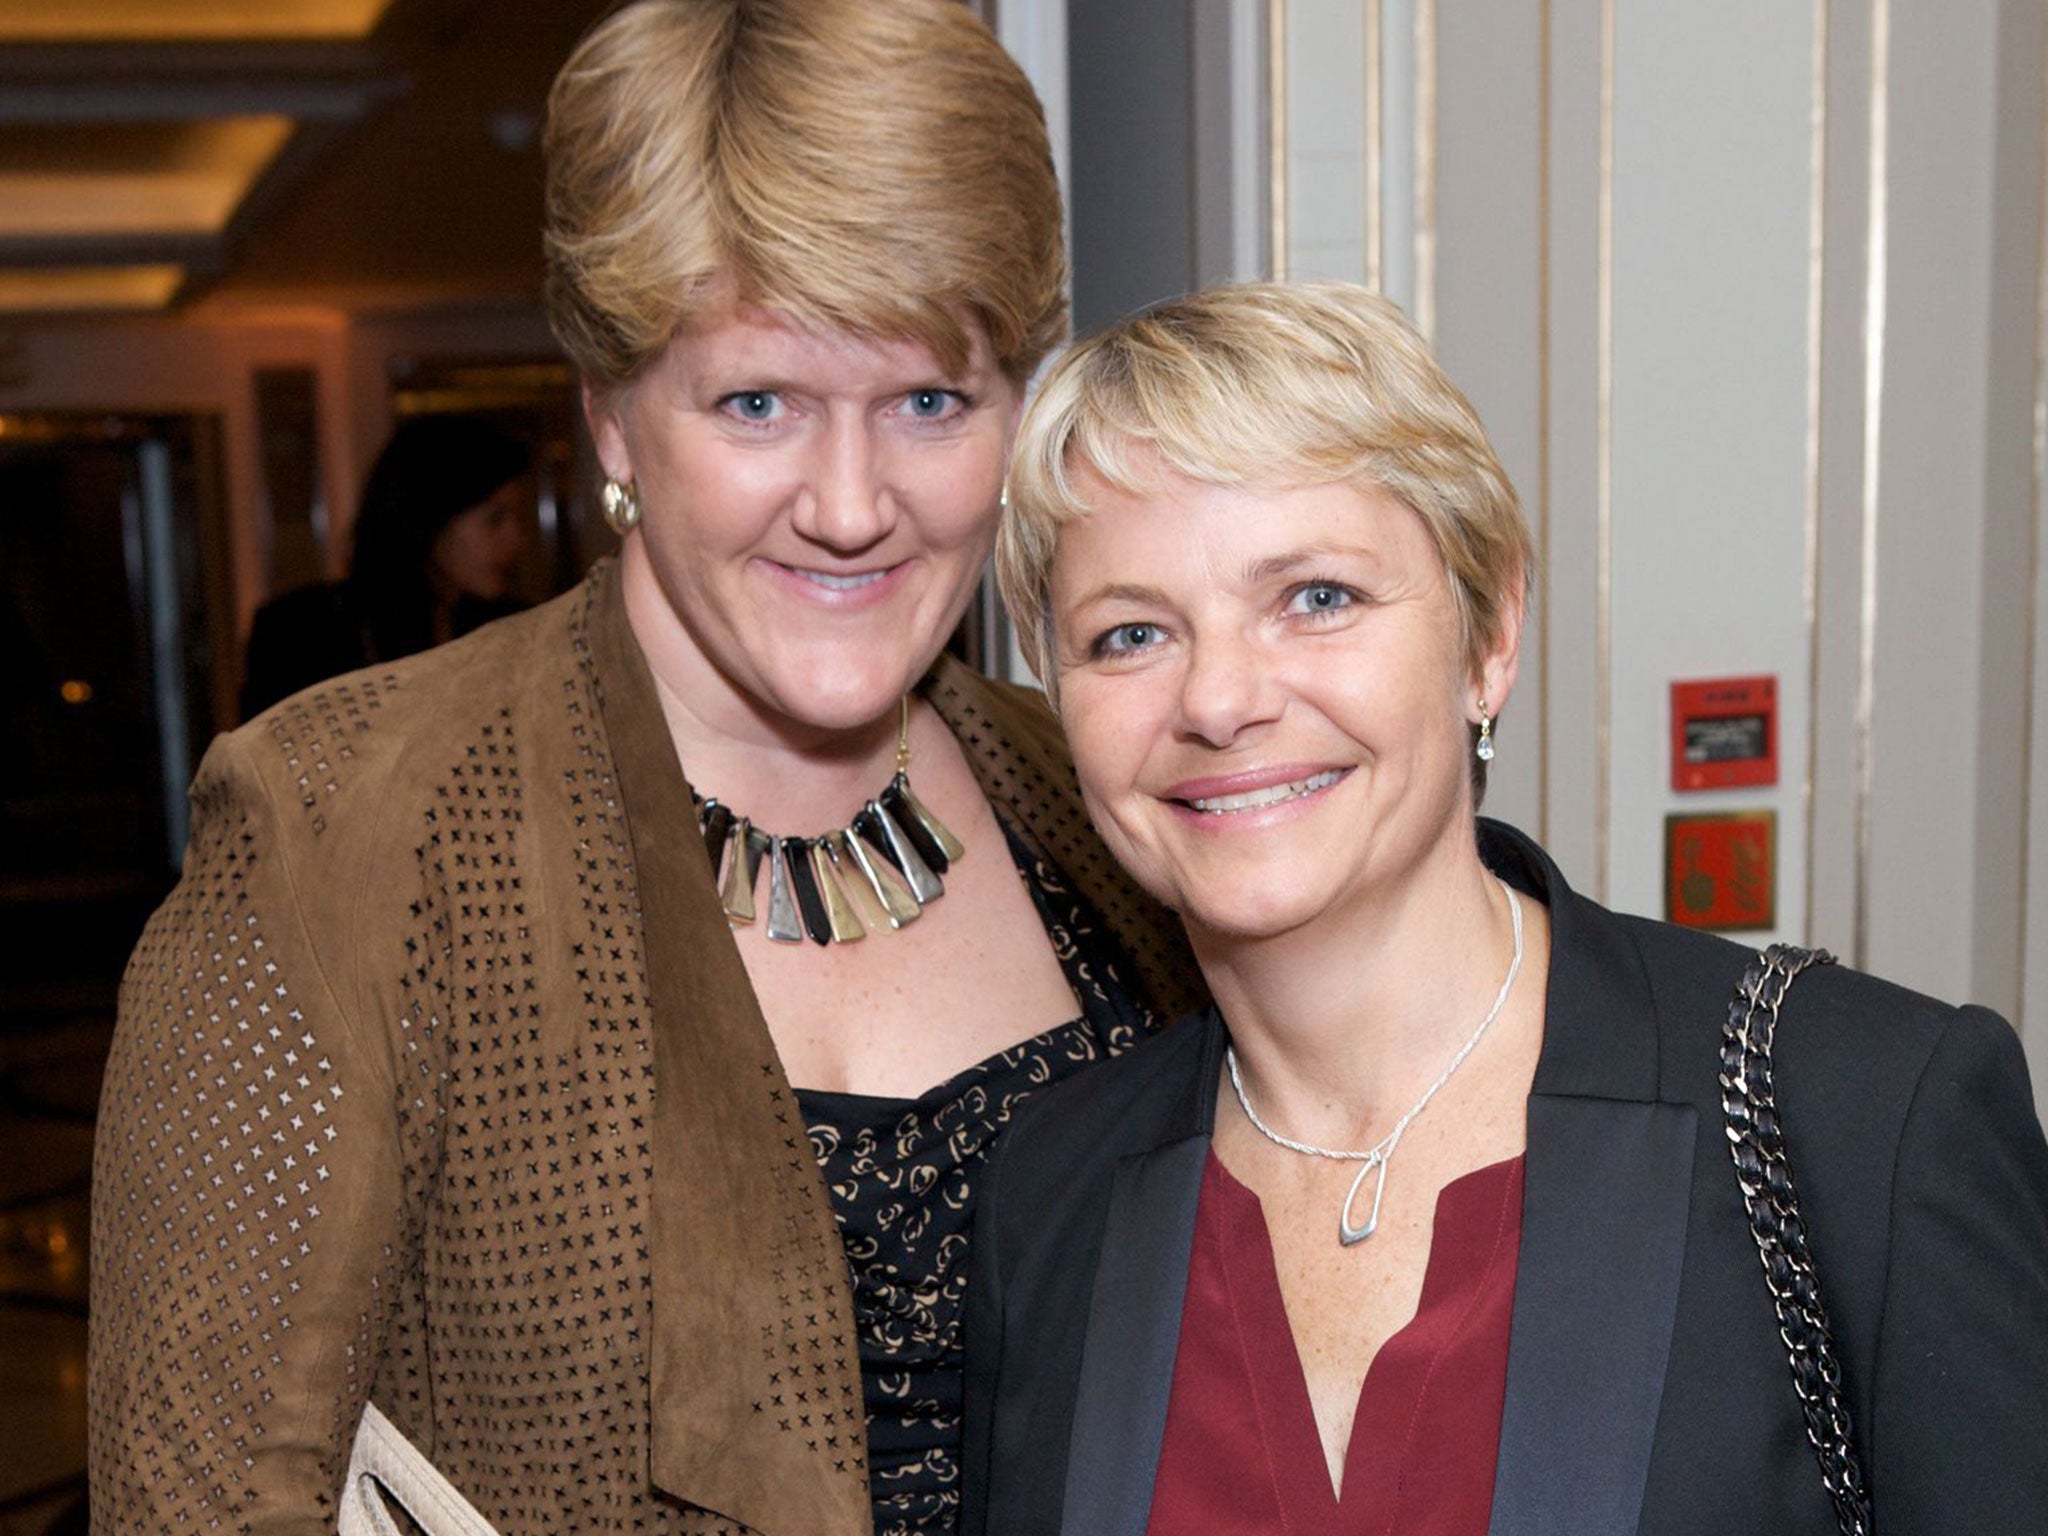 Clare Balding and her wife Alice Arnold